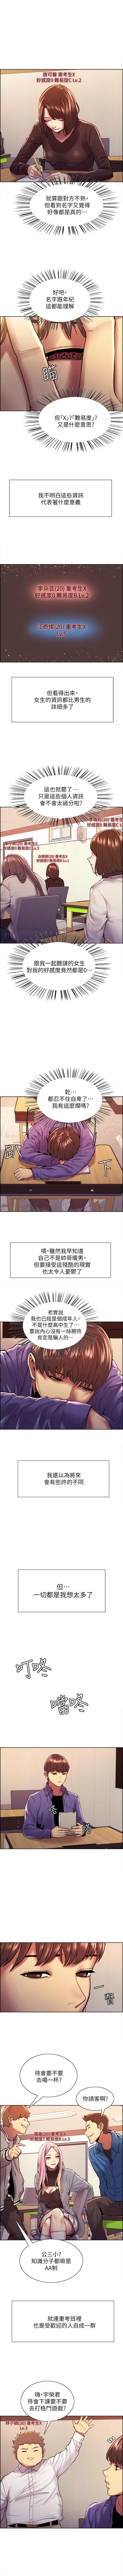 Toys 色輪眼 1-24 官方中文 Strap On - Page 5